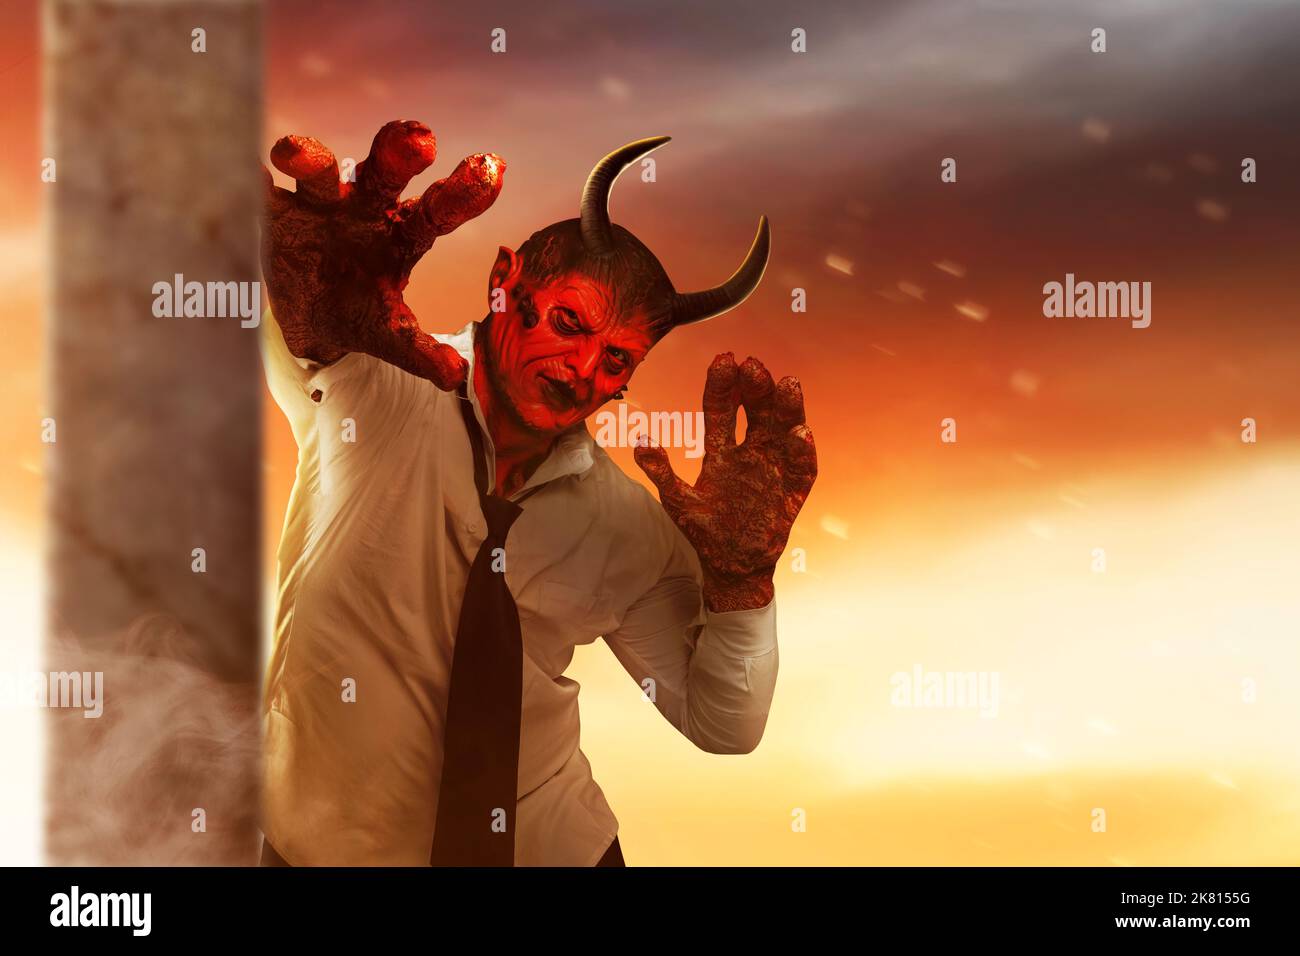 Devilman is standing in the dramatic scene background. Halloween concept Stock Photo